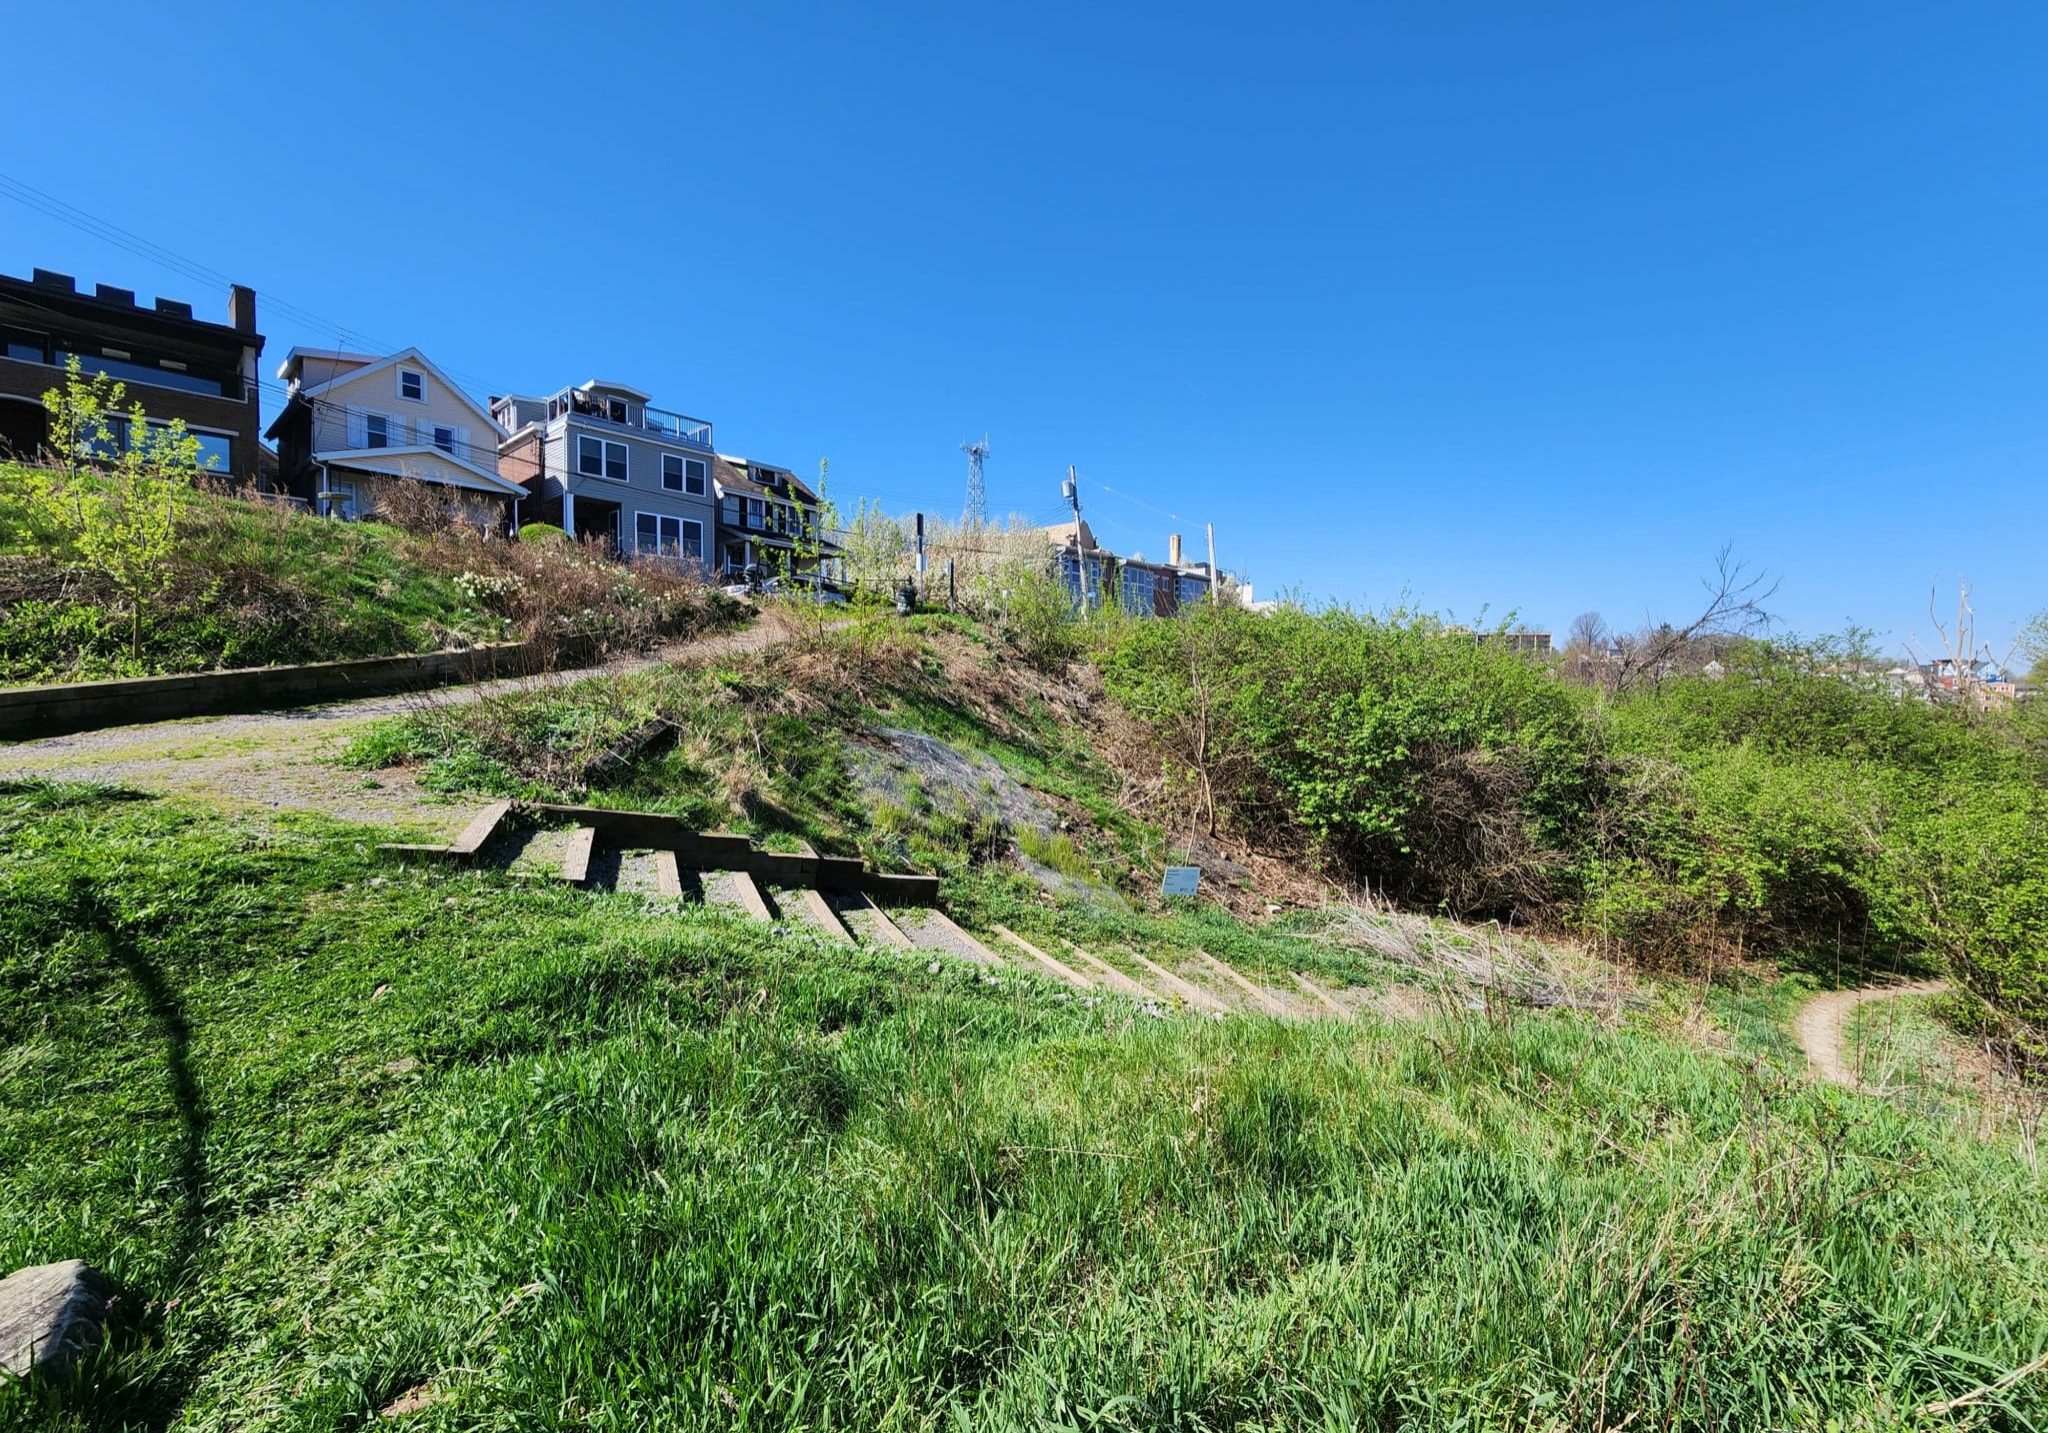 Grass, steps, and meadow area of Emerald View Park